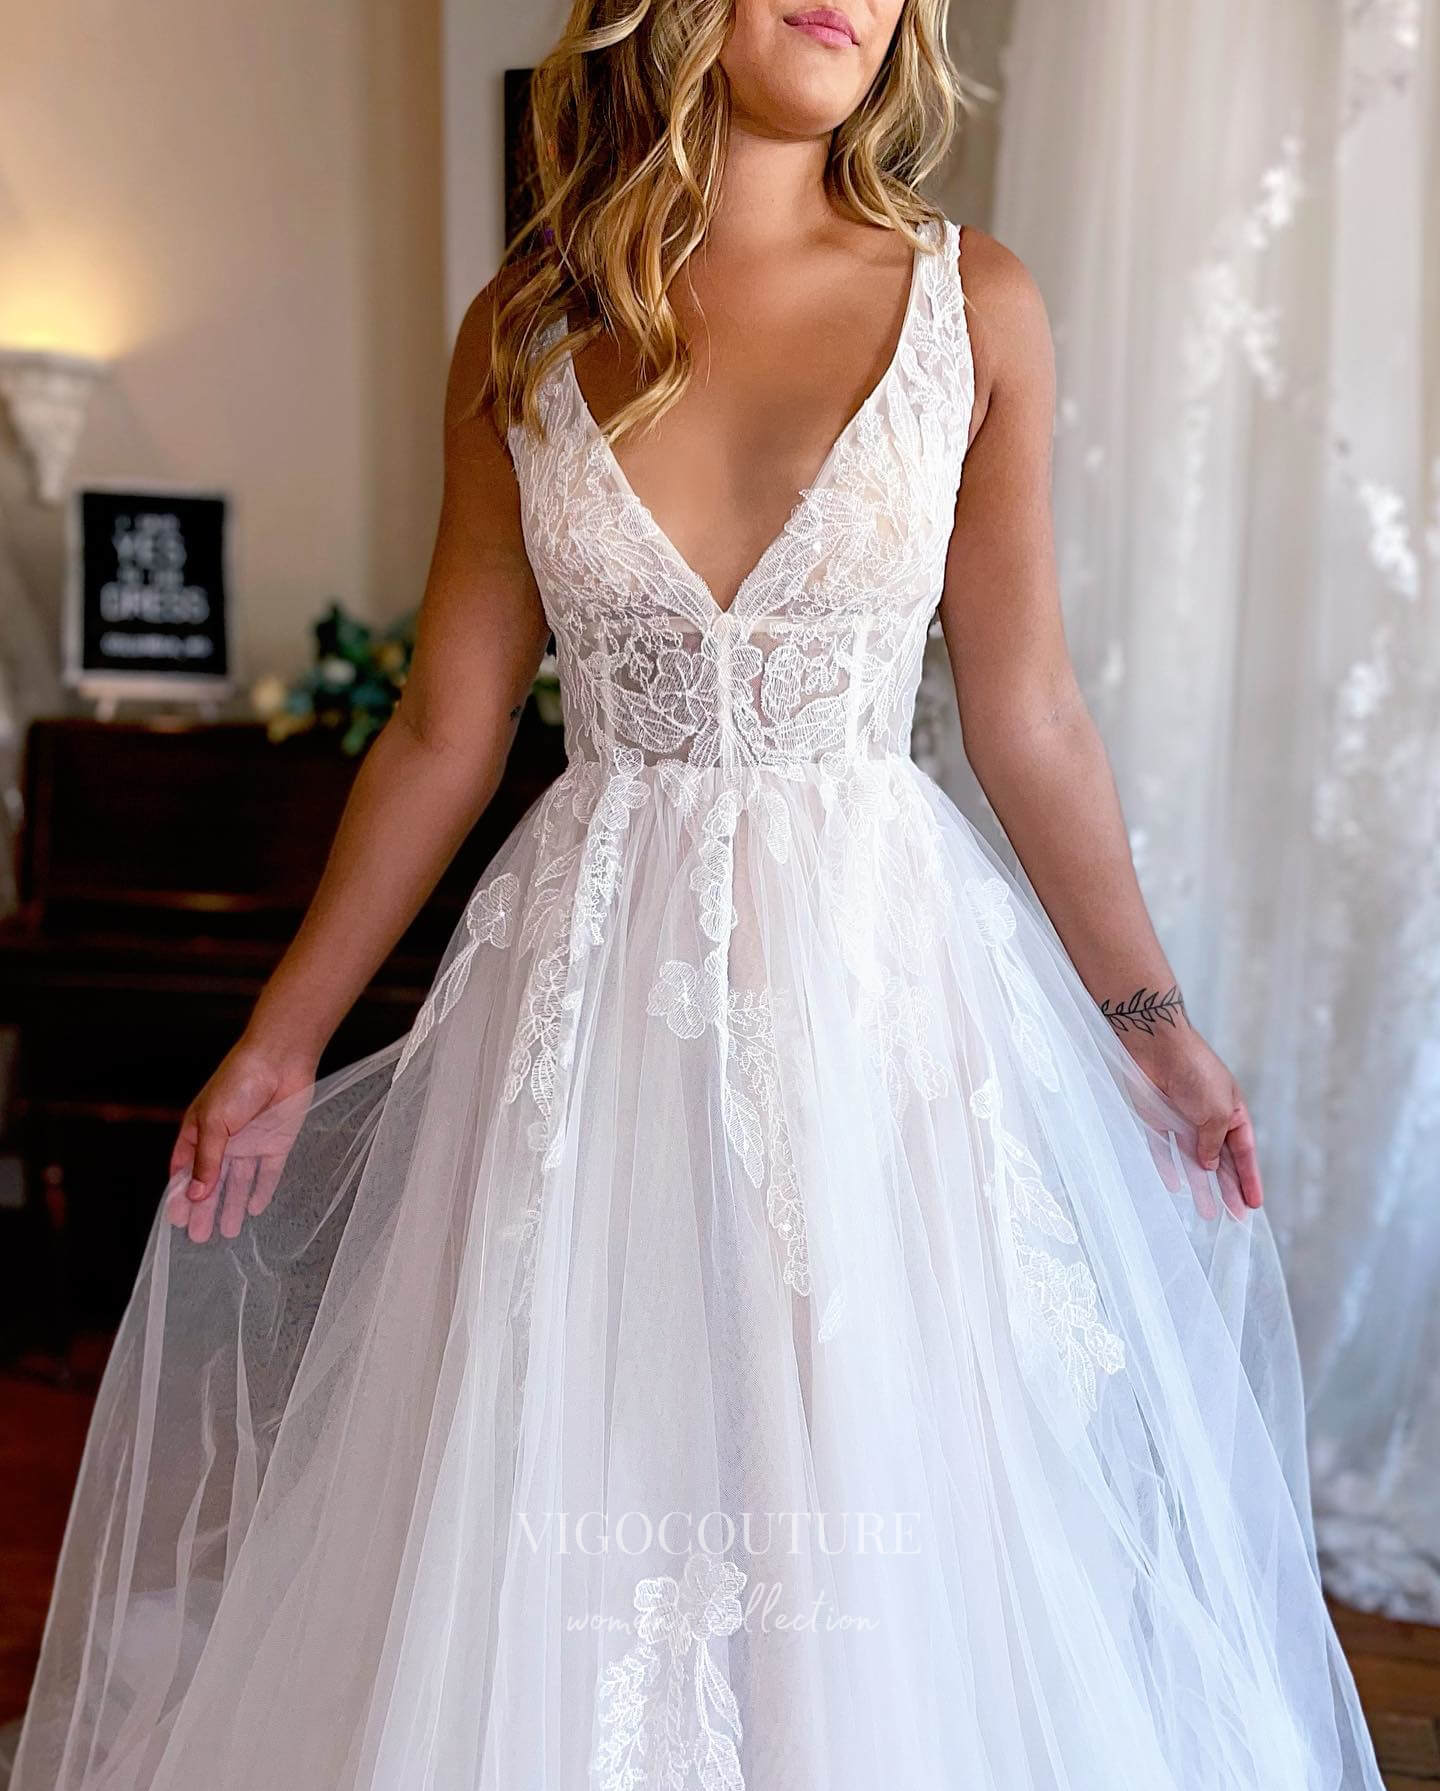 Graceful Ivory Lace Applique Tulle Wedding Dress with Plunging V-Neck and Cathedral Train W0104-Wedding Dresses-vigocouture-Ivory-US2-vigocouture